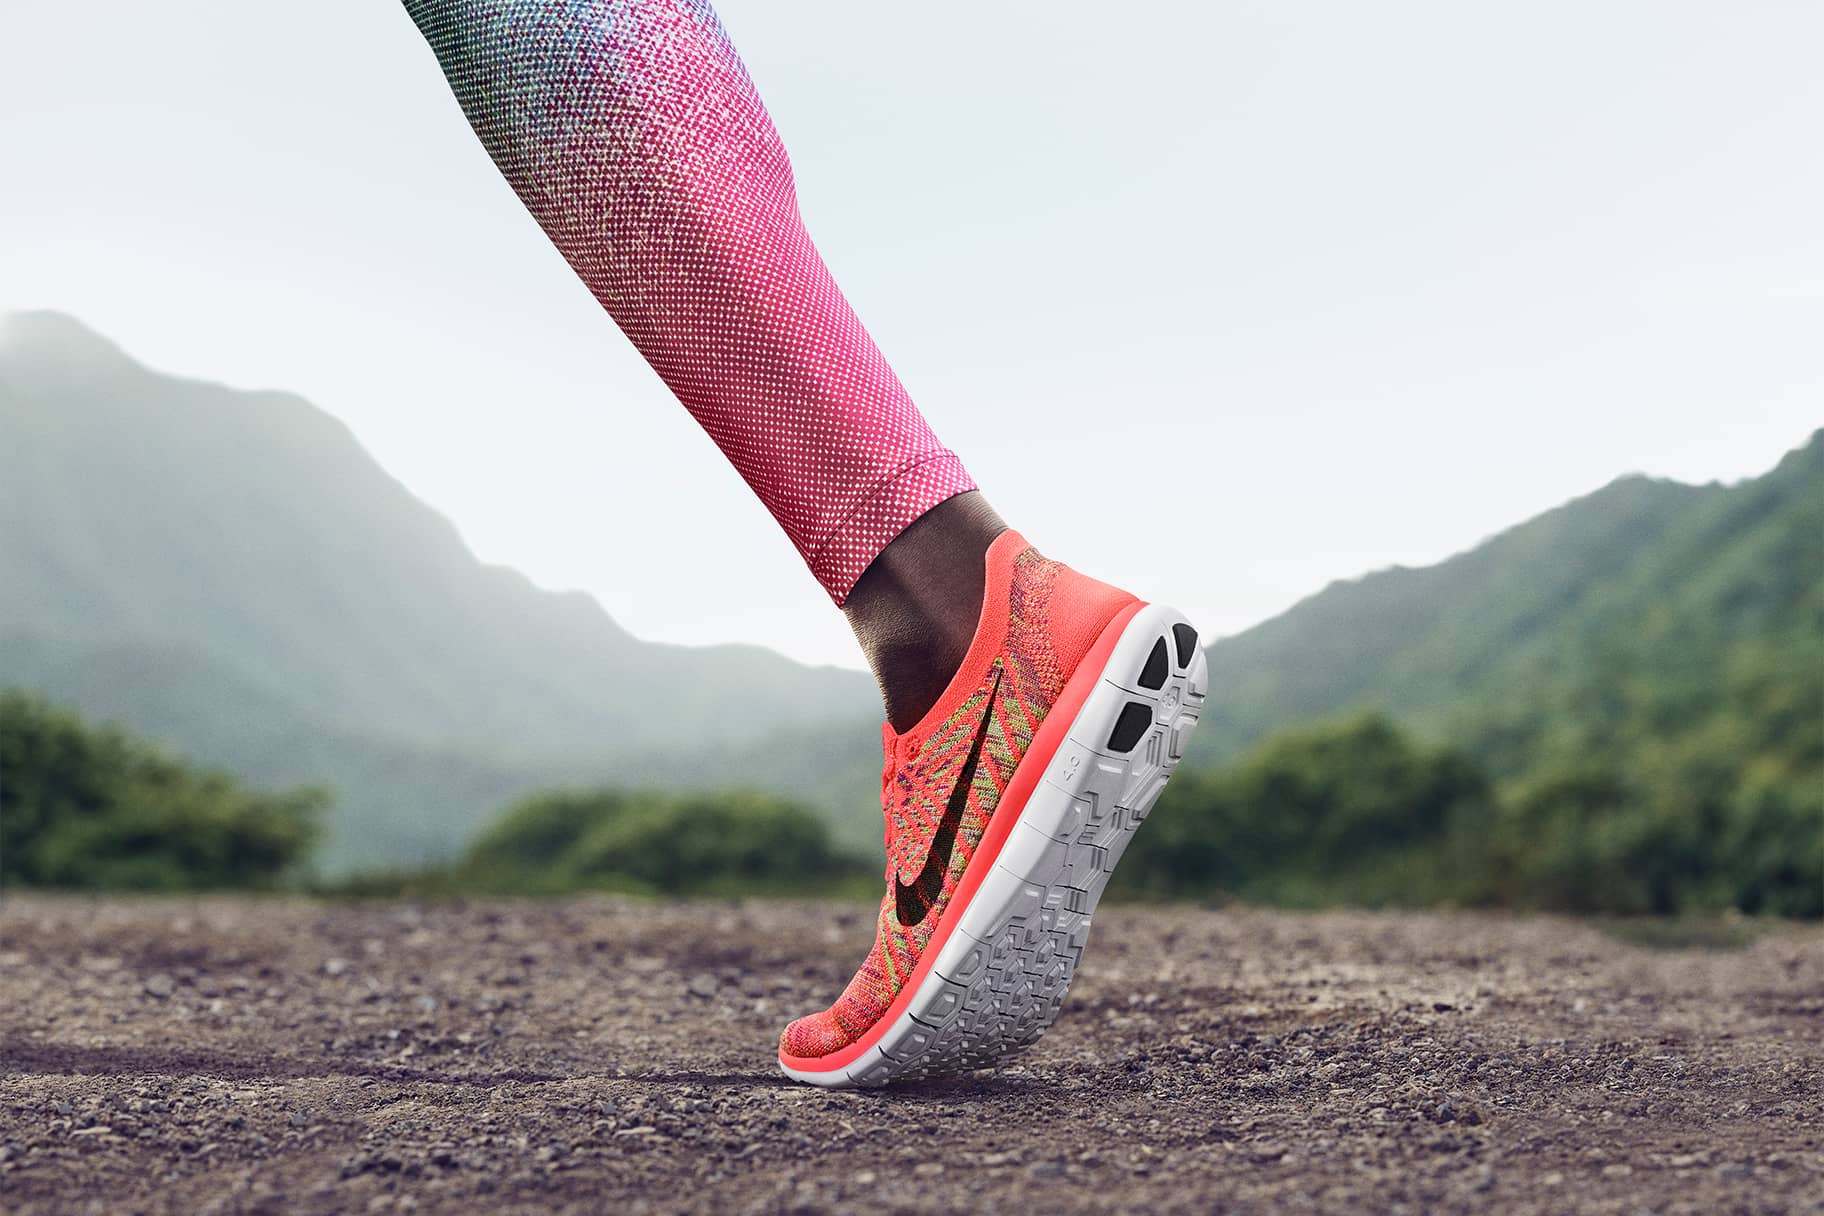 Tips for Buying Minimalist Running Shoes